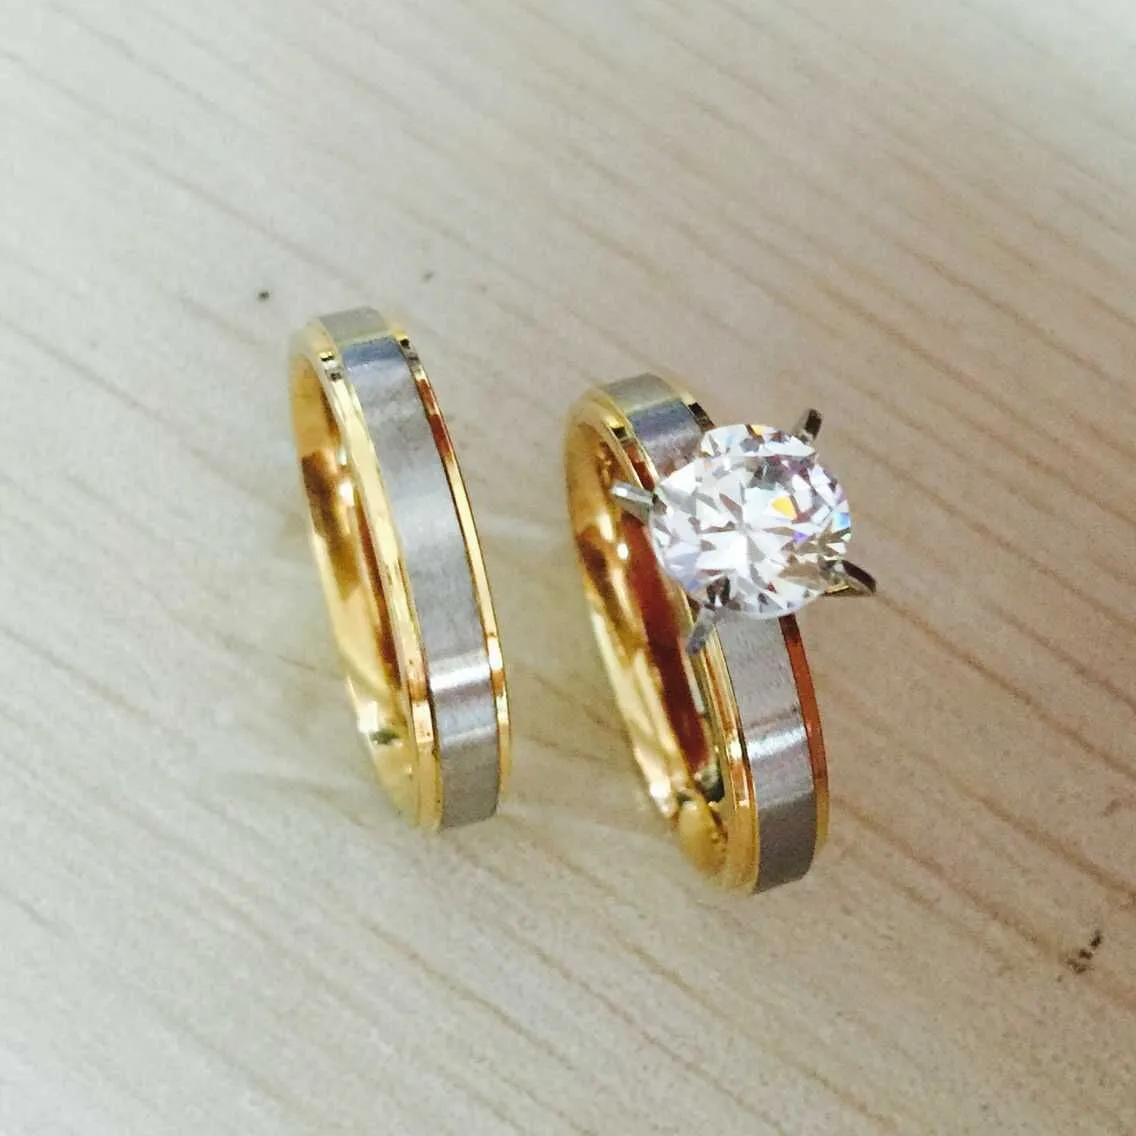 4mm titanium Steel CZ diamond Korean Couple Rings Set for Men Women Engagement Lovers, his and hers promise,2 tone gold silver